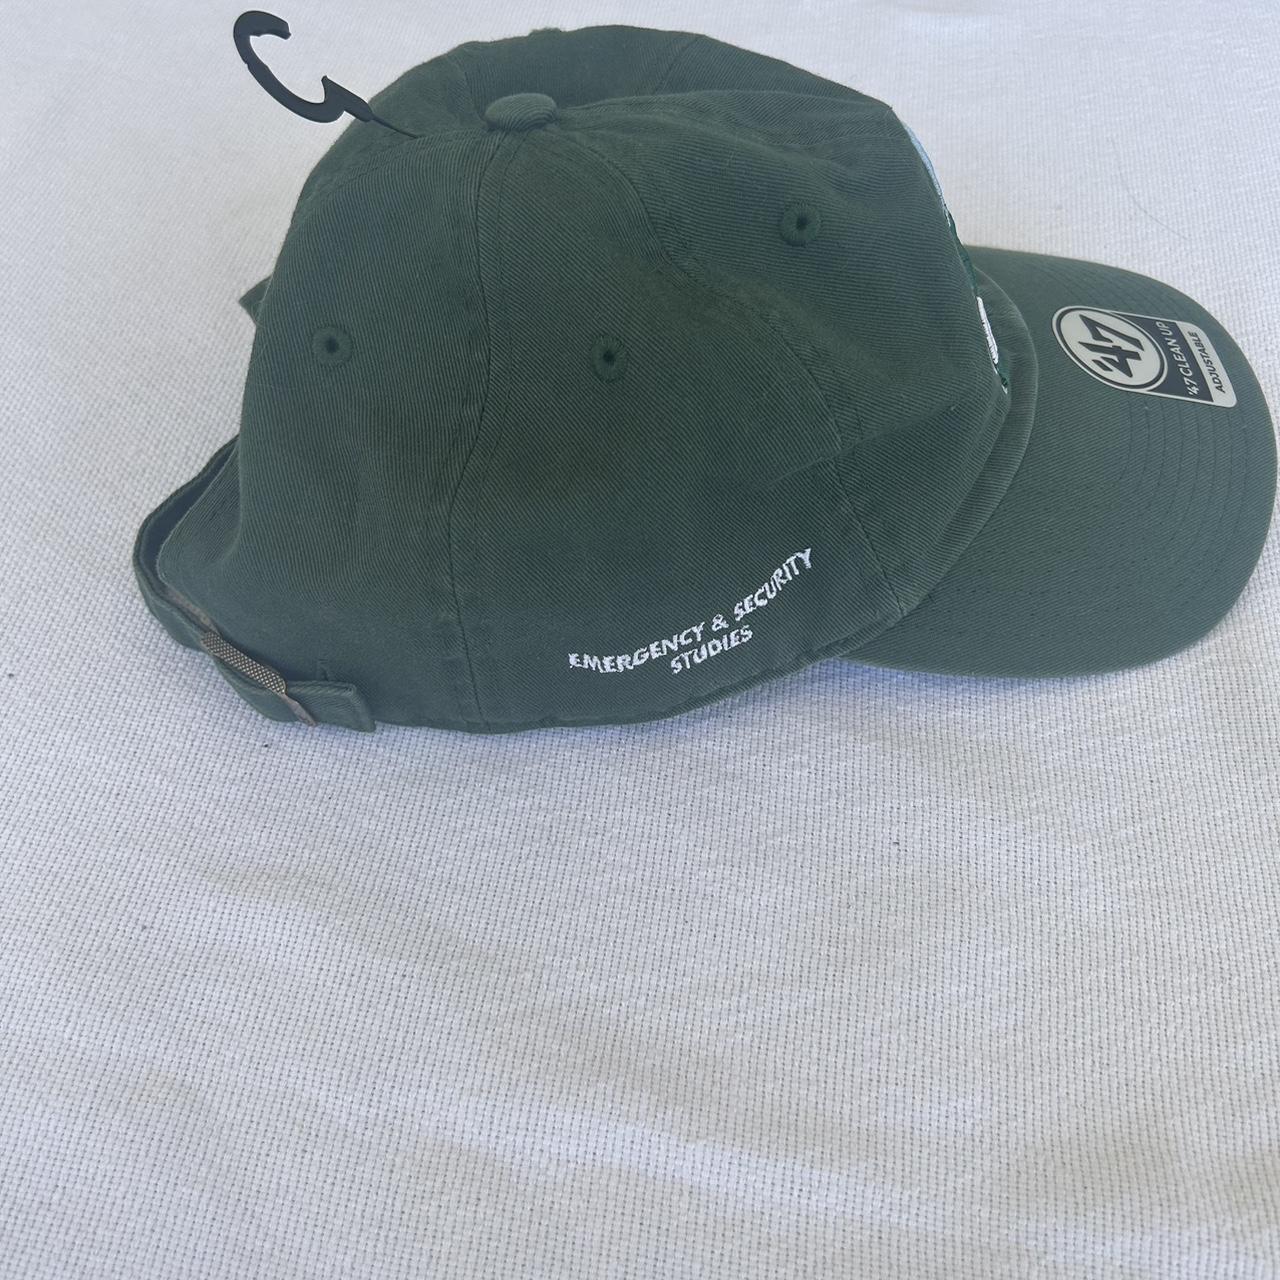 ‘47 Tulane green wave hat One size fits all #tulane - Depop